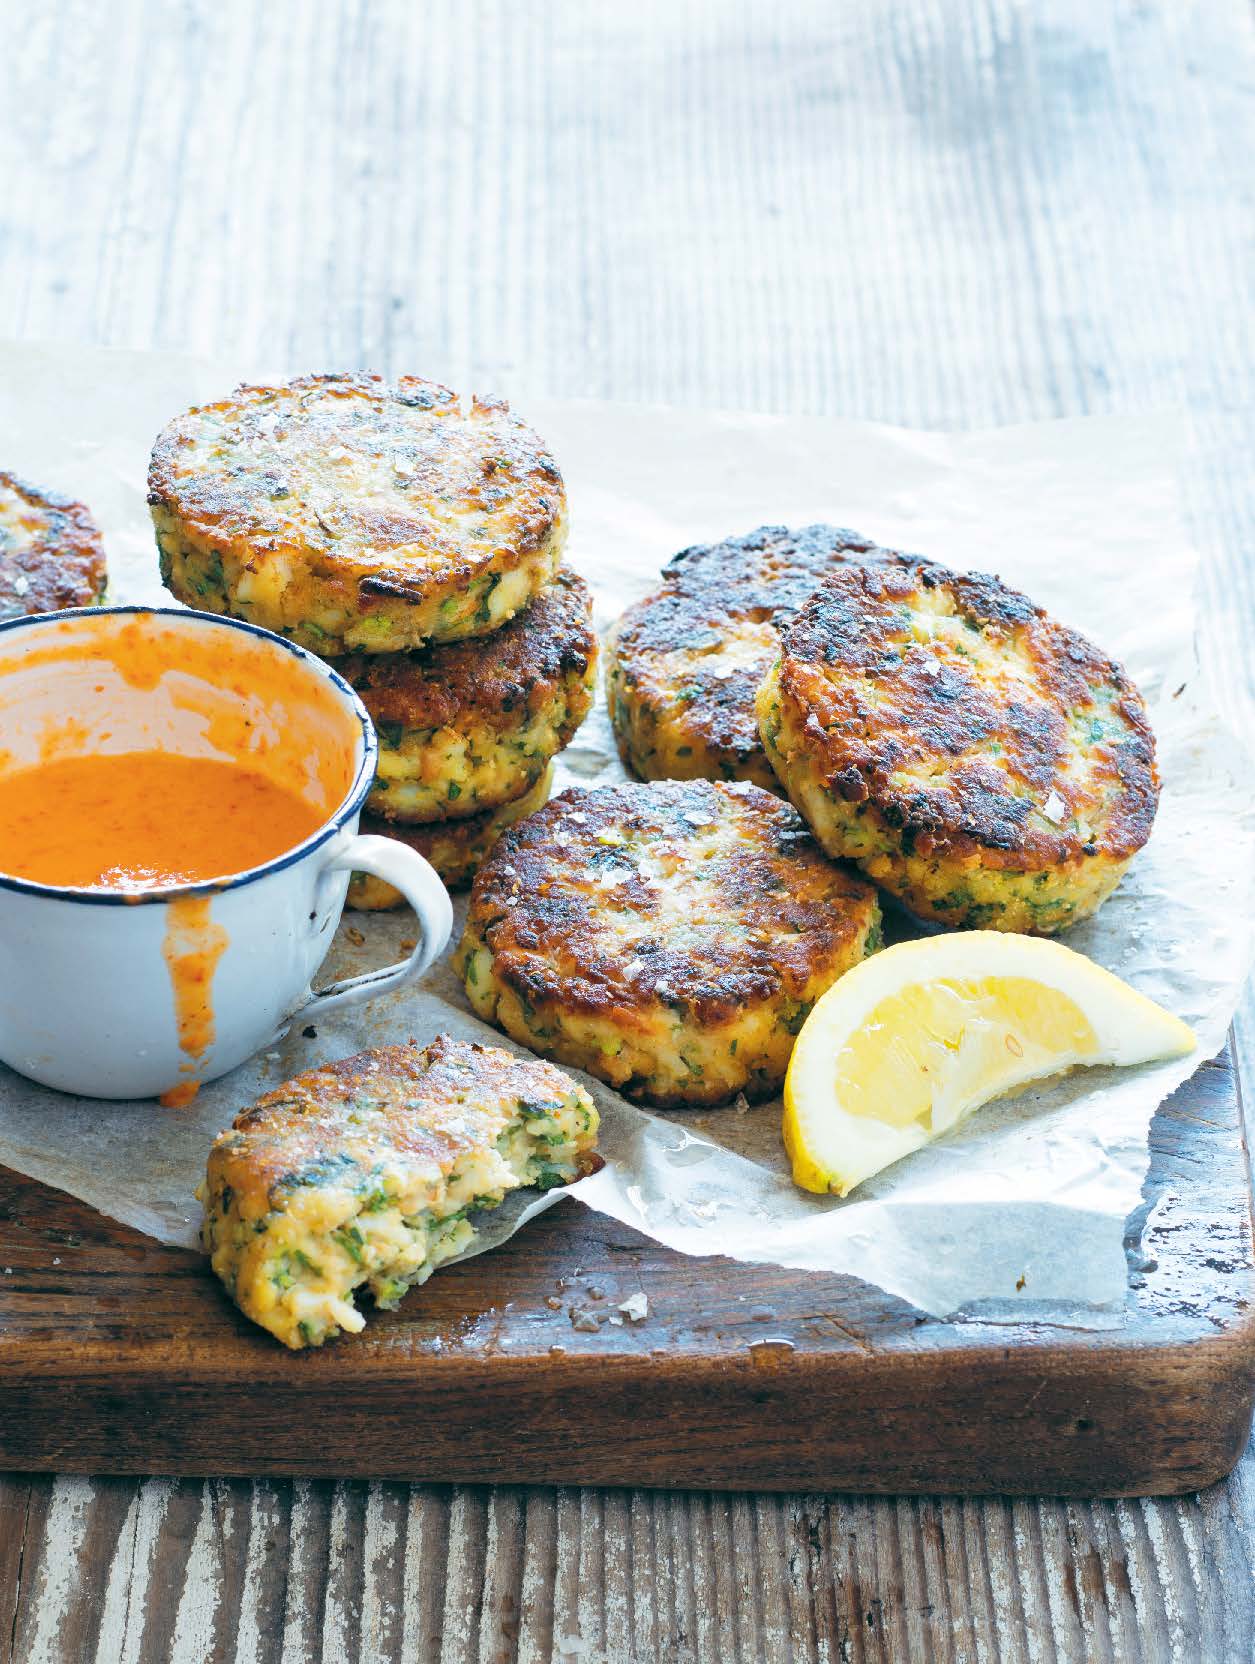 Crab cakes with red mayonnaise